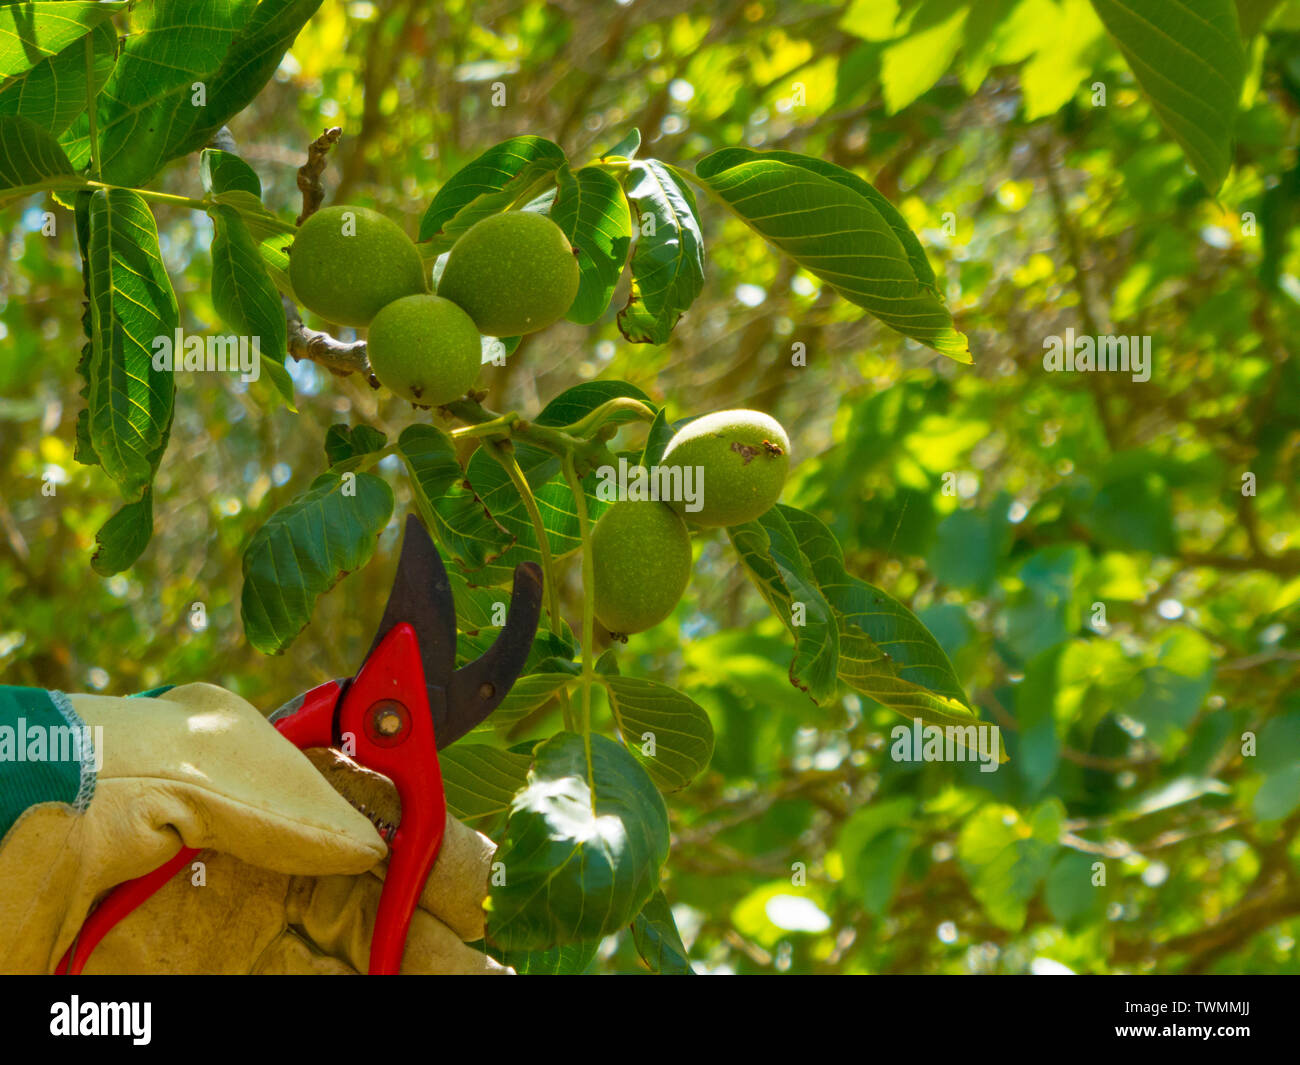 Hand with glove using red shears in a garden pruning fresh walnuts Stock Photo